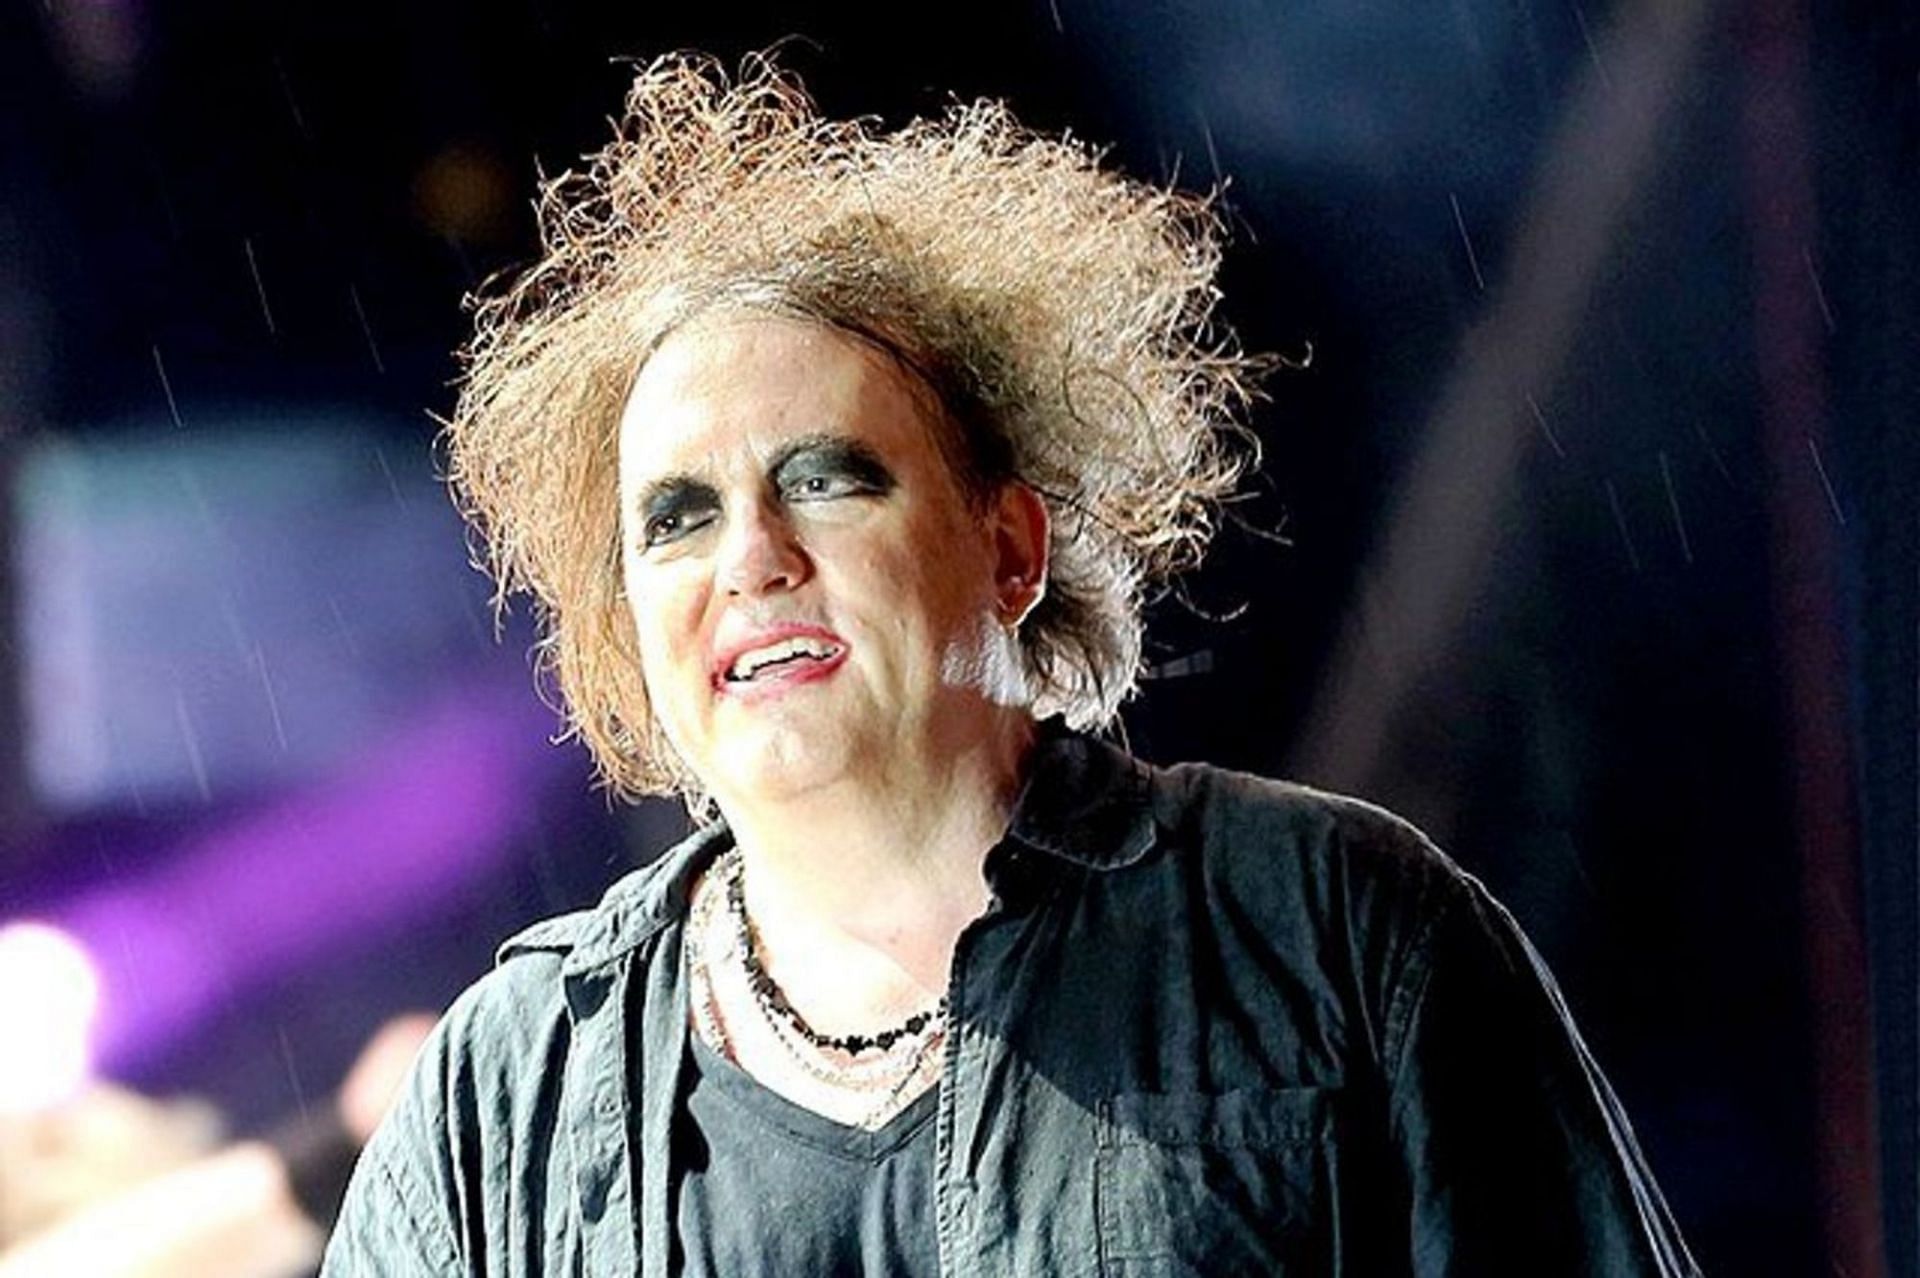 Grooming allegations against The Cure